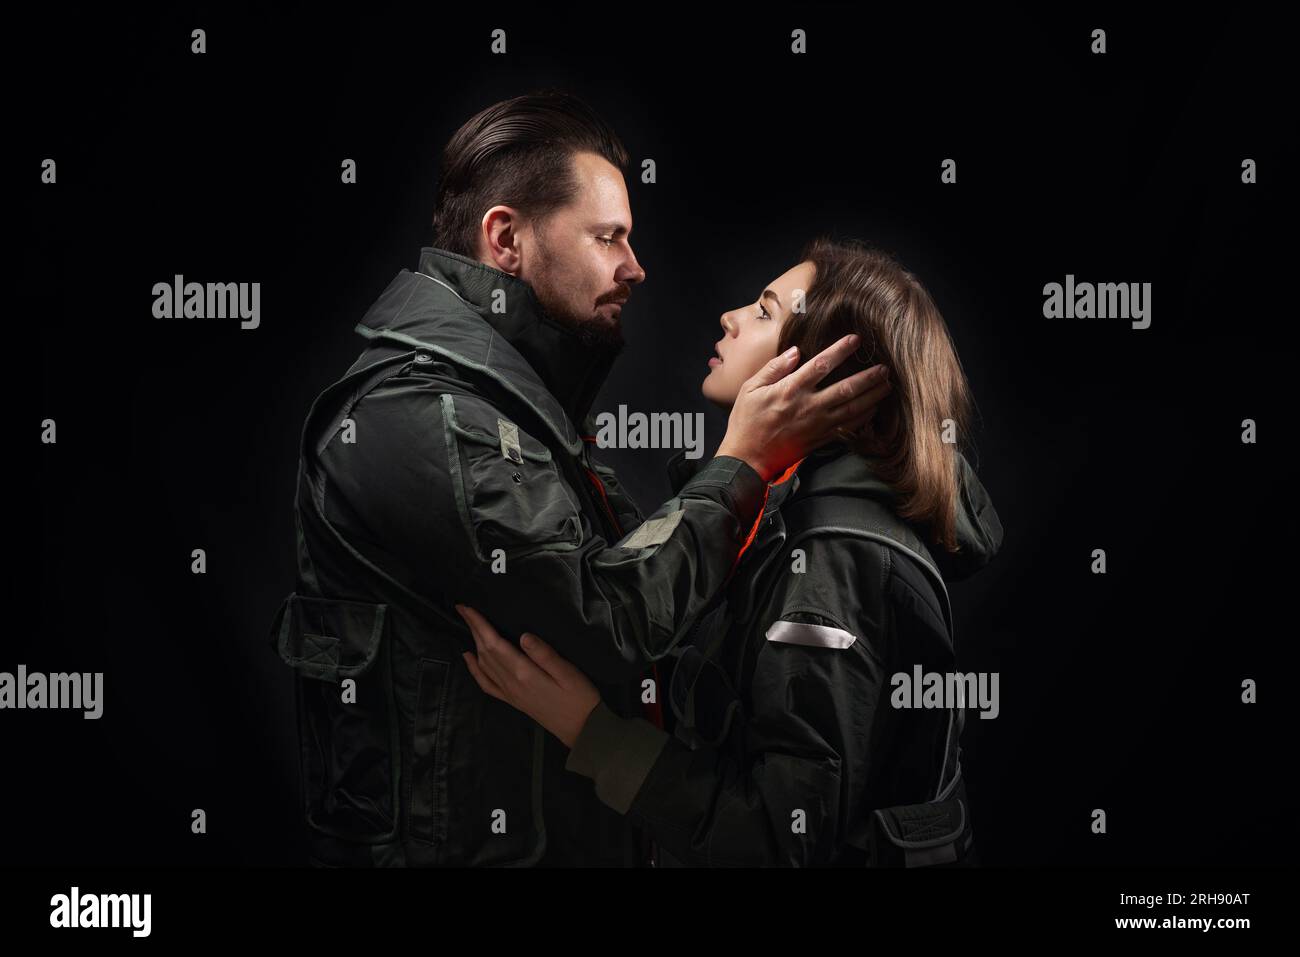 Hugging couple on a black background. Support concept. Stock Photo